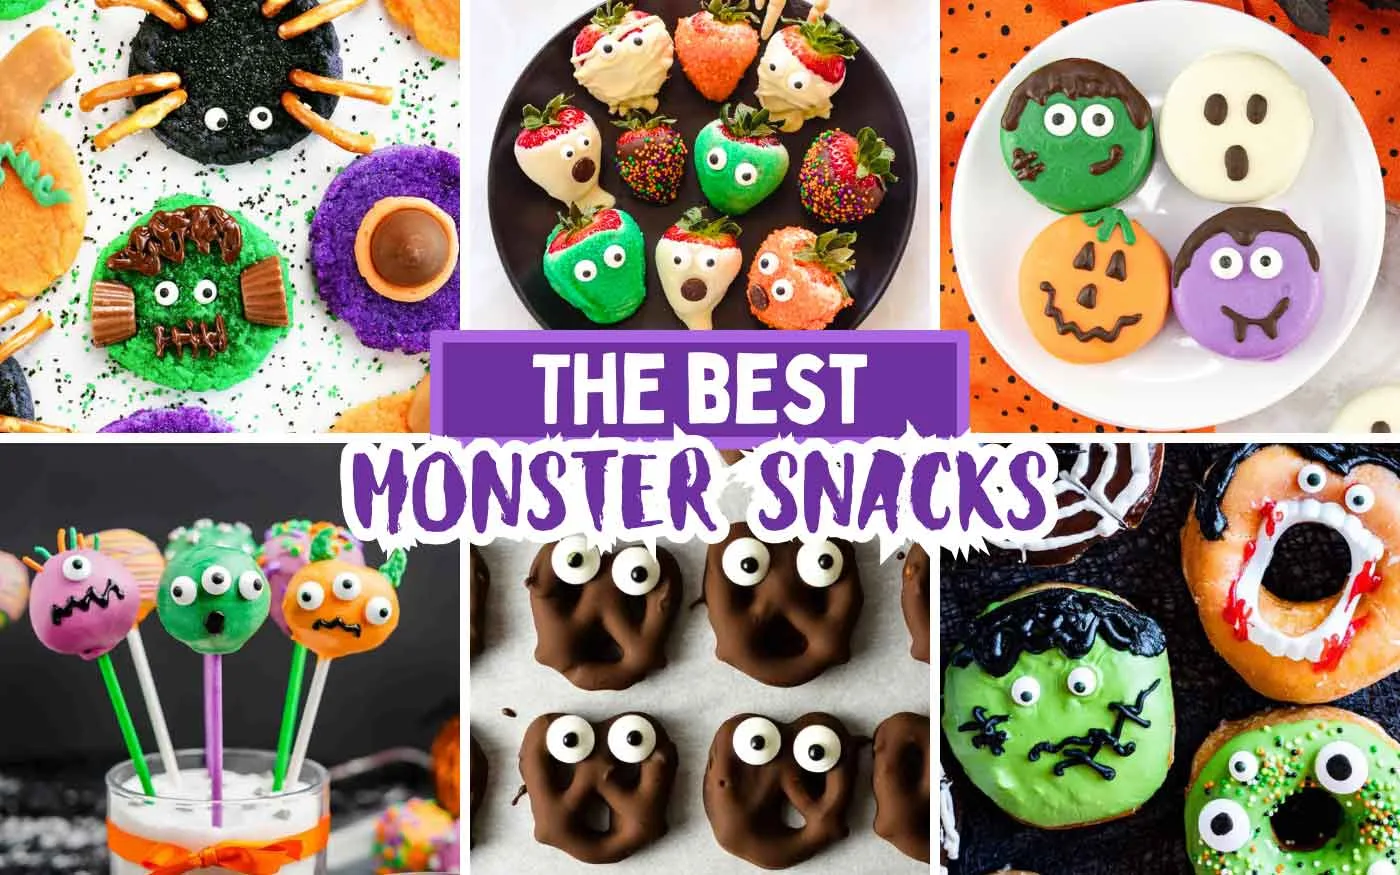 Collage of Halloween monster snacks with text overlay that says 